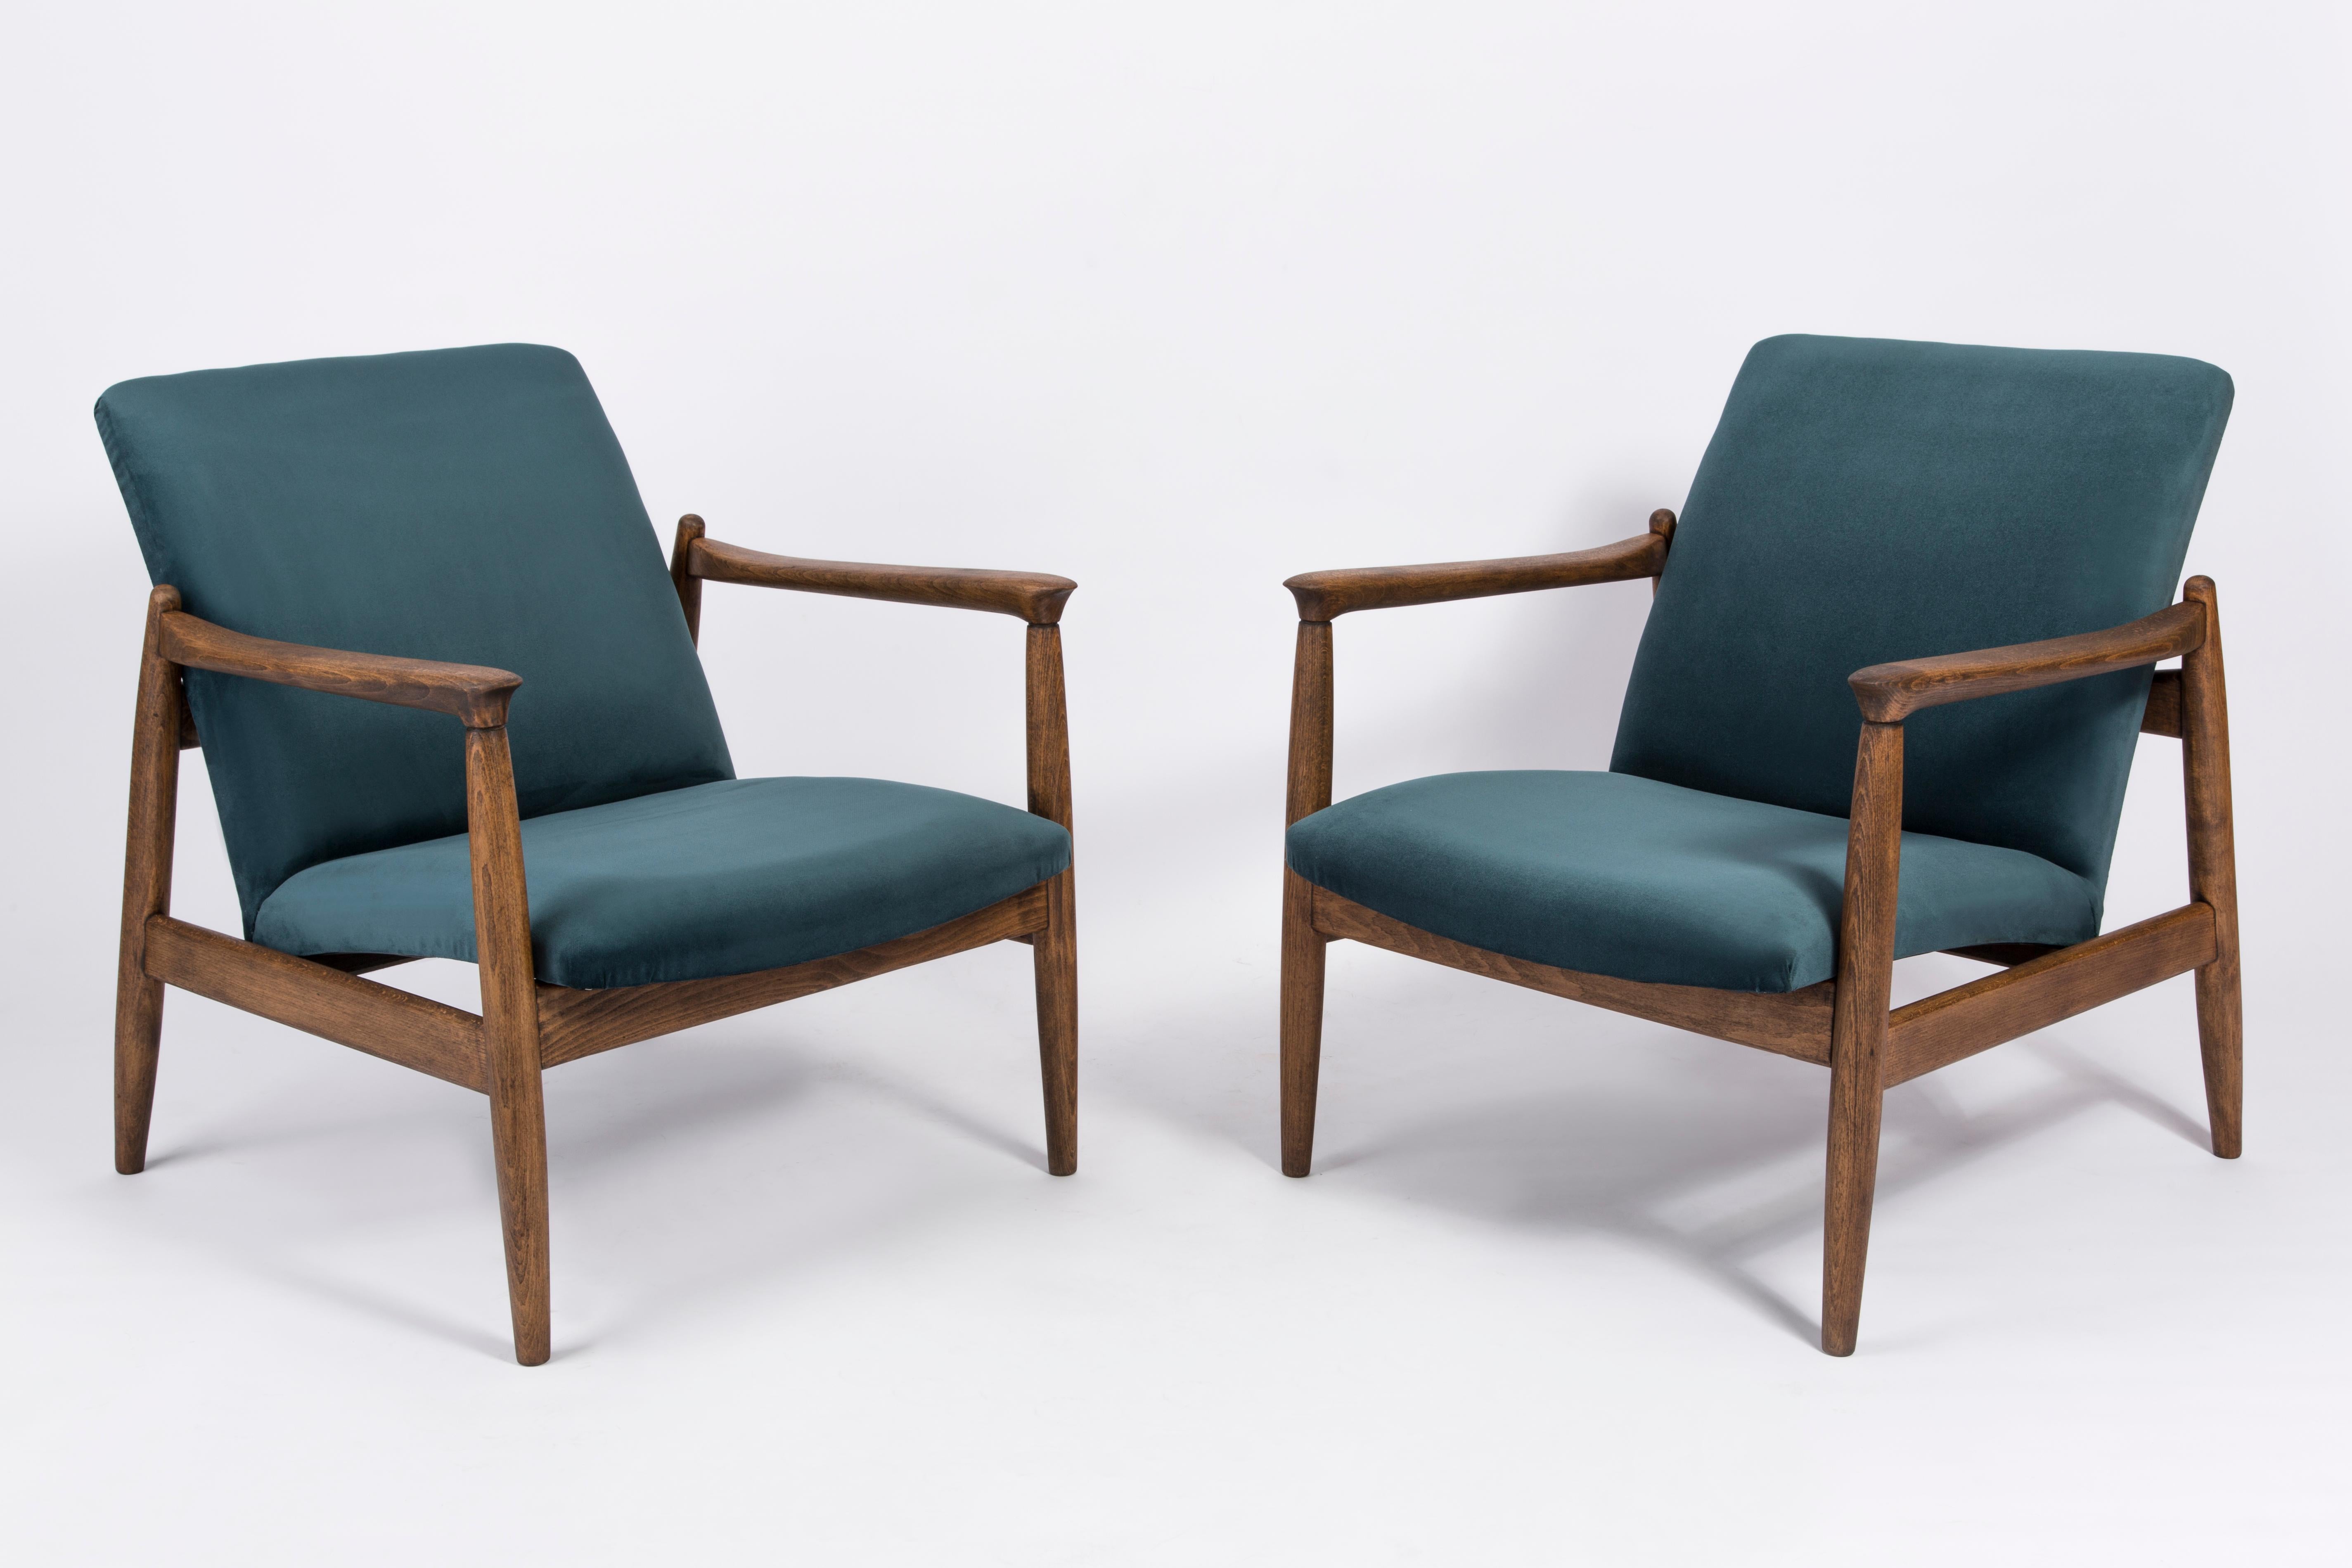 A pair of petrol blue armchairs, designed by Edmund Homa. The armchairs were made in the 1960s in the Gosciecinska Furniture Factory. They are made from solid beechwood. The GFM type armchair is regarded one of the best Polish armchair design from